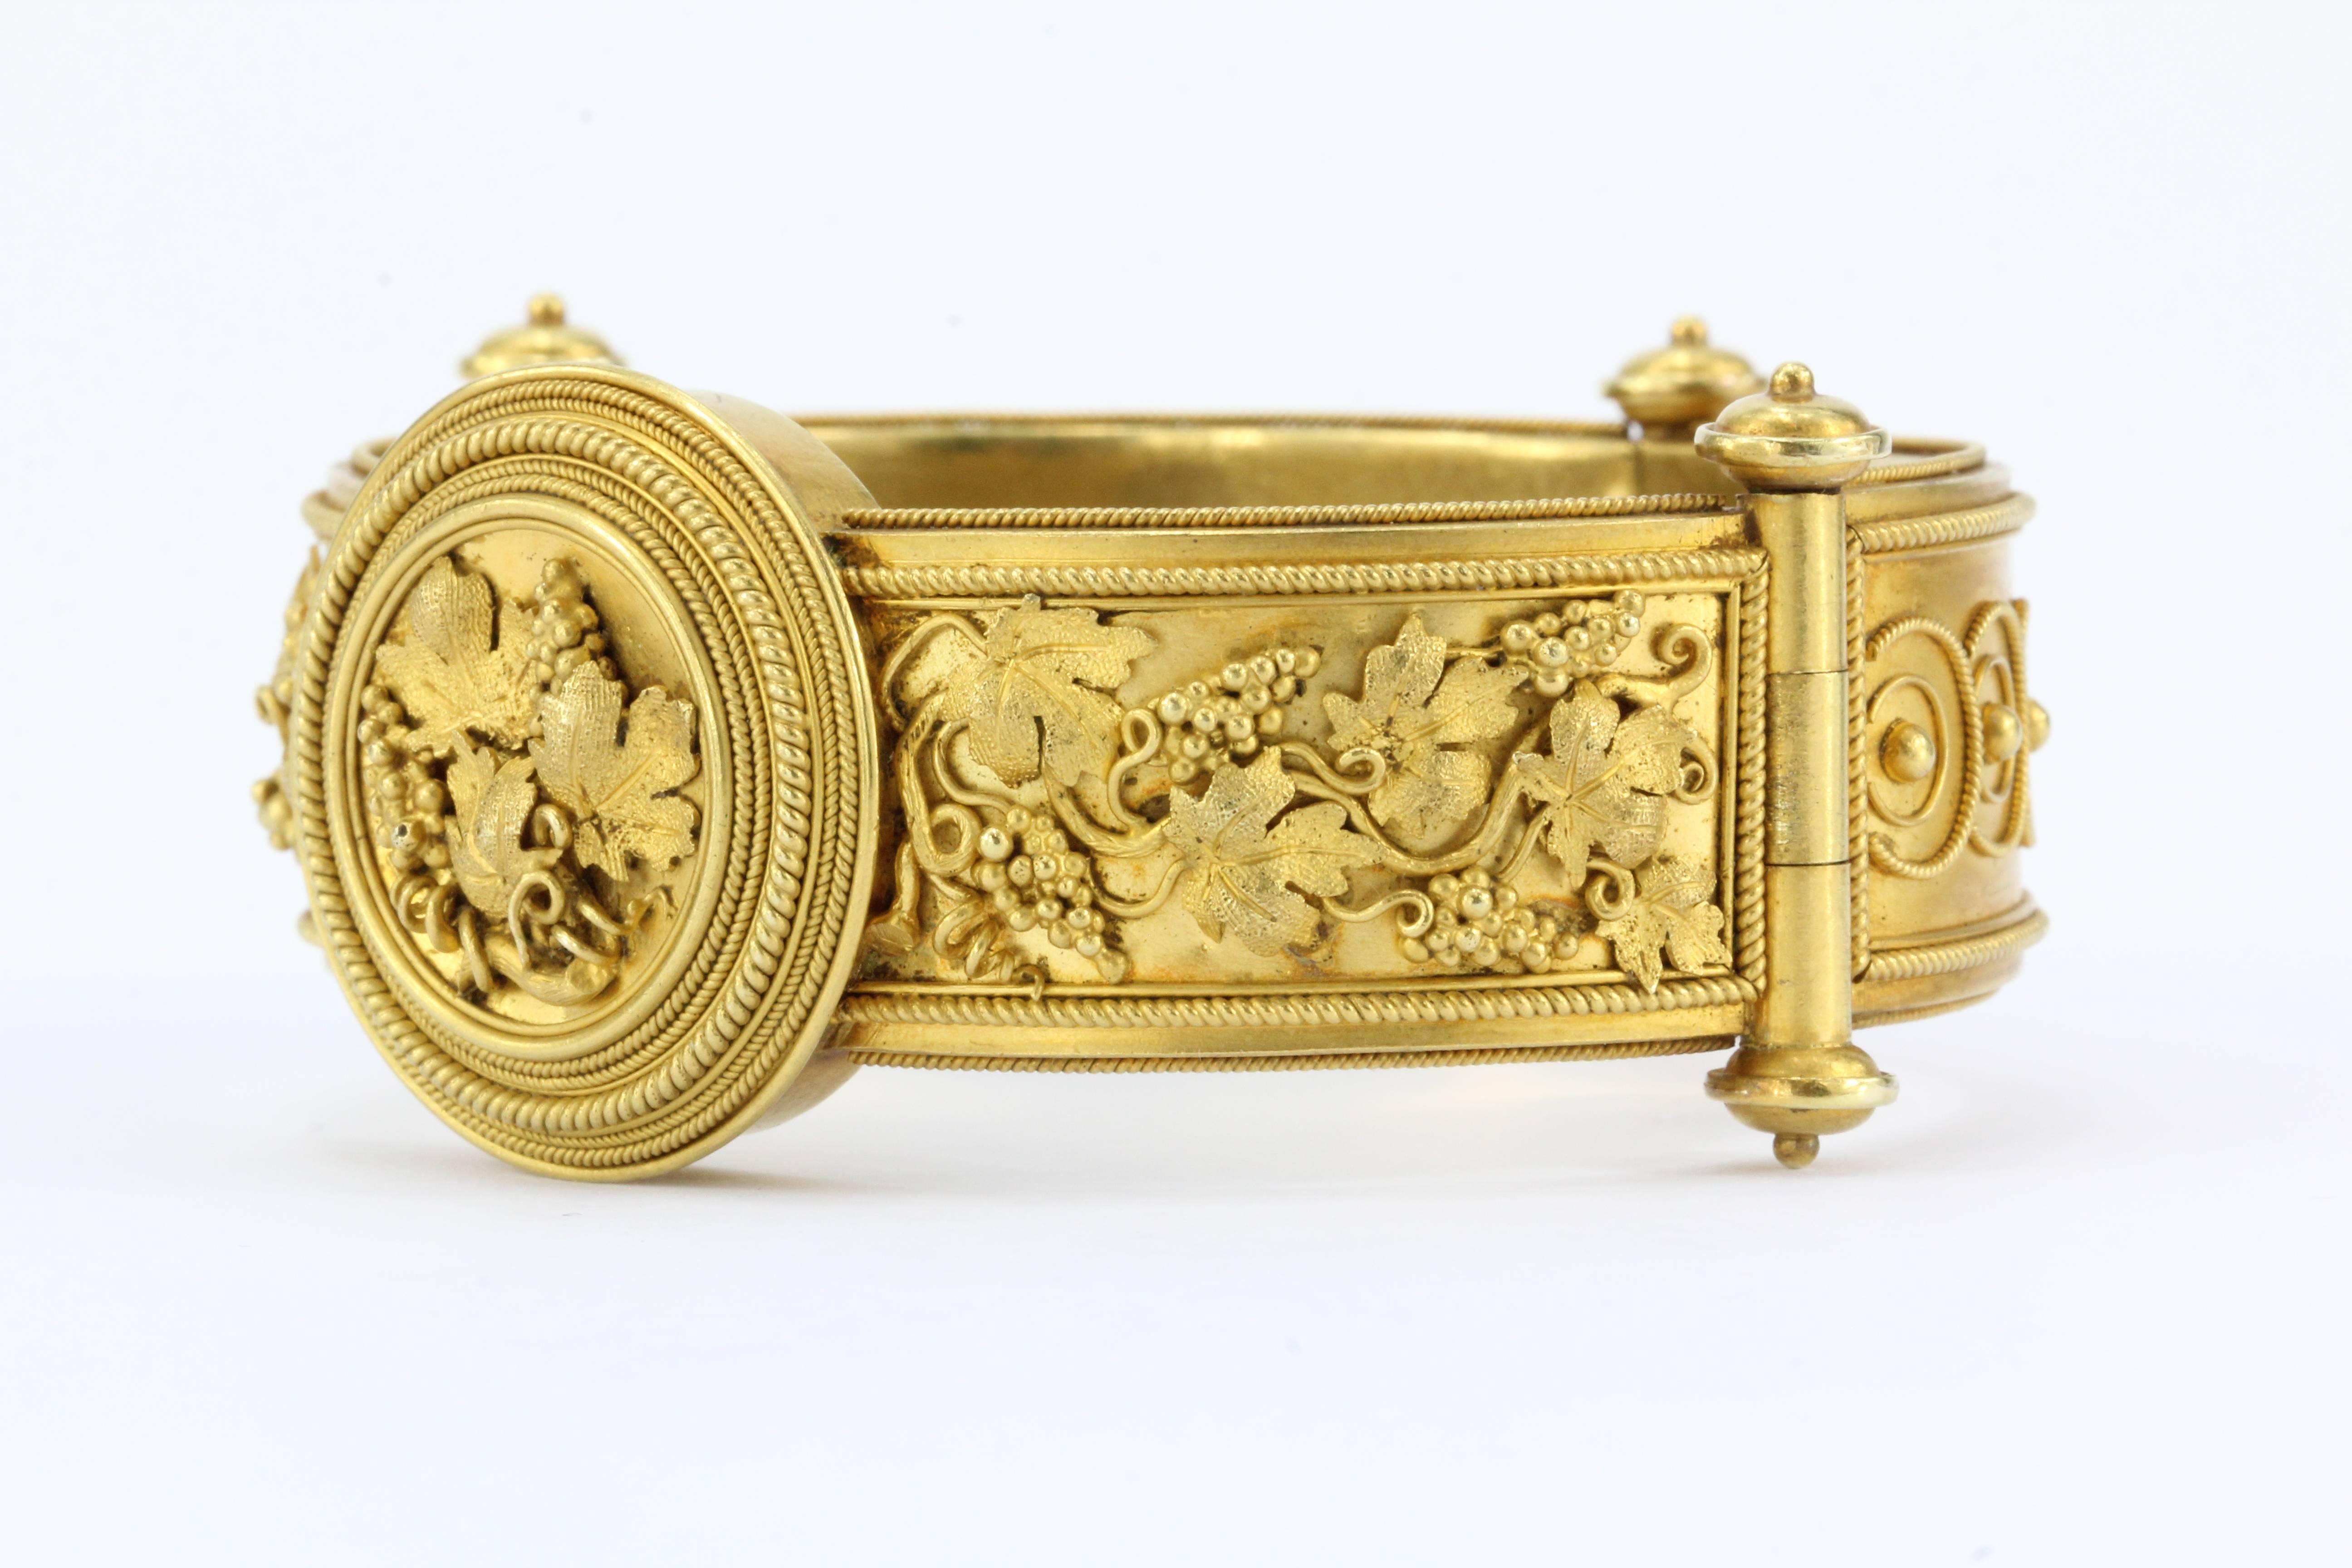 Victorian 22k Gold Etruscan Revival Grape Bangle Bracelet c.1870

Crafted with a workmanship not commonly seen outside of museums collections this bangle is in wonderful condition. The back has a hidden compartment that conceals a place to keep a